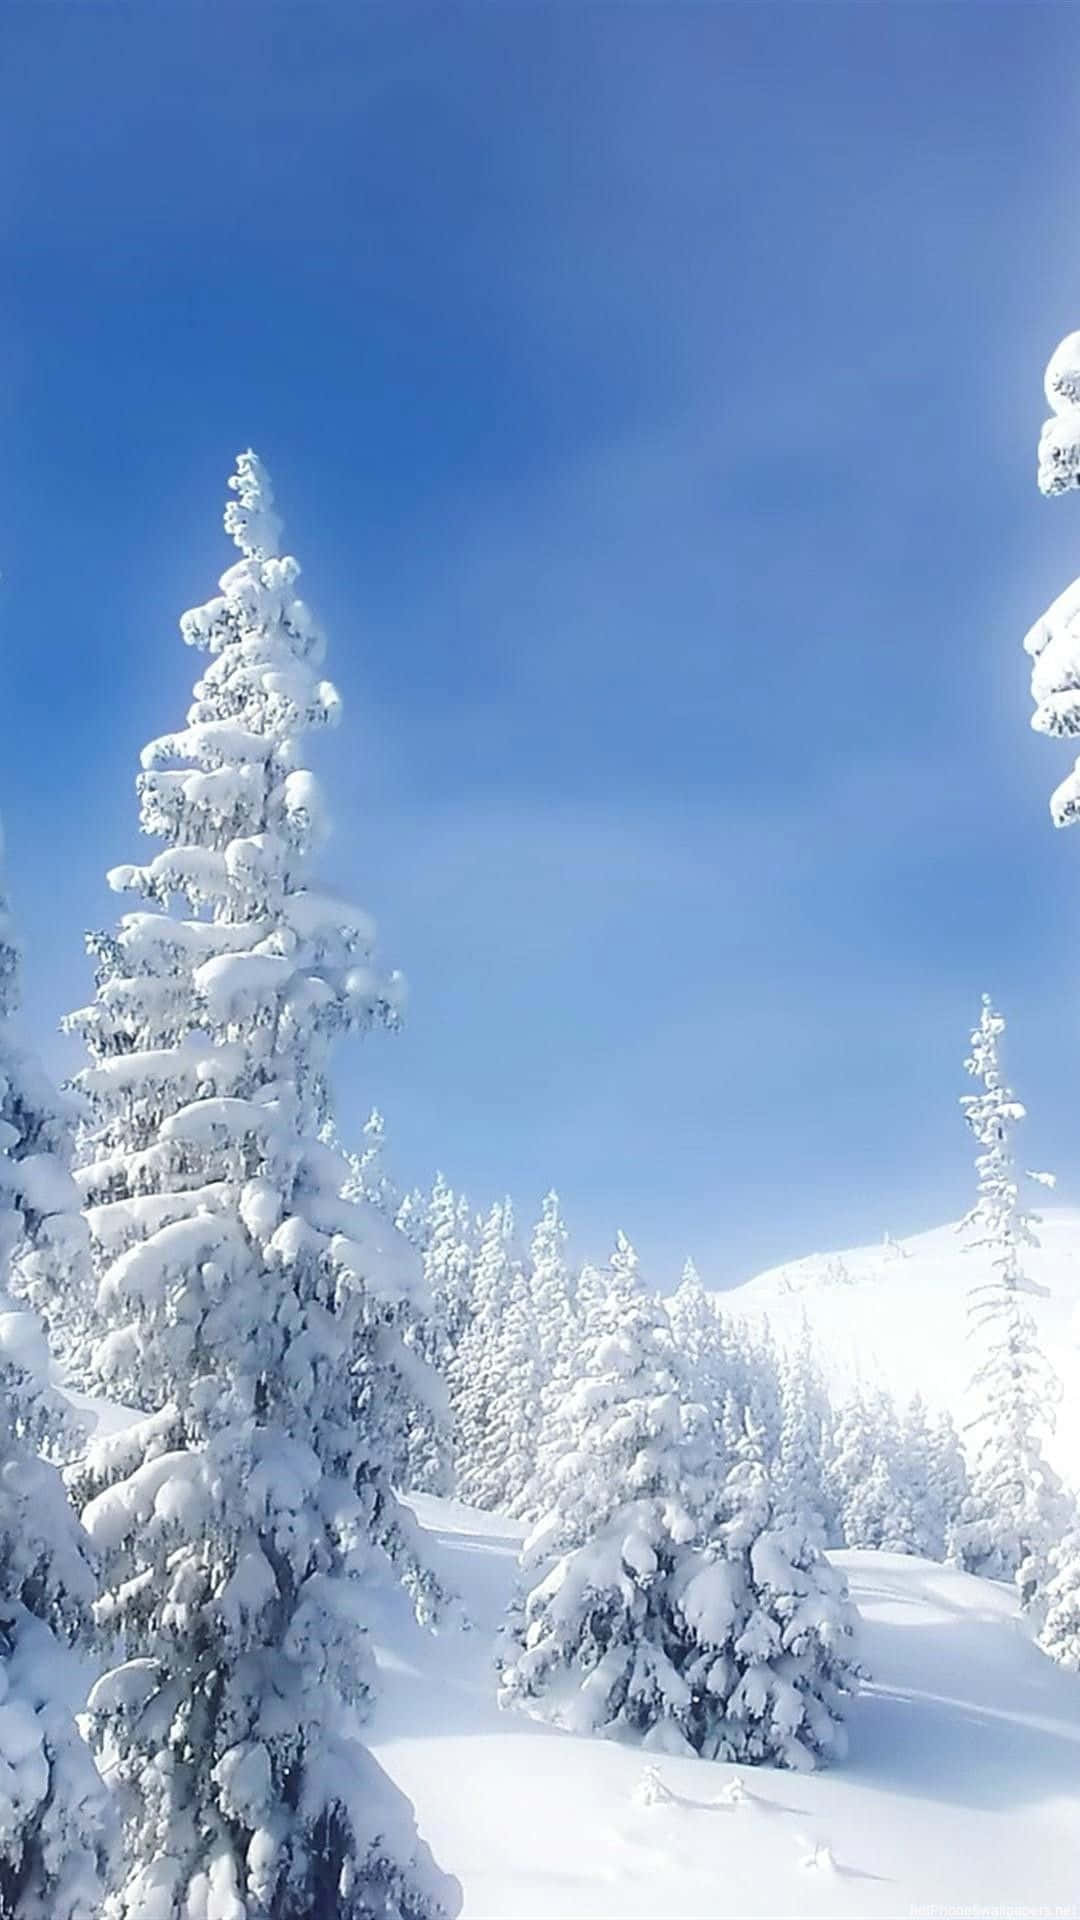 A Snow Covered Mountain With Blue Sky